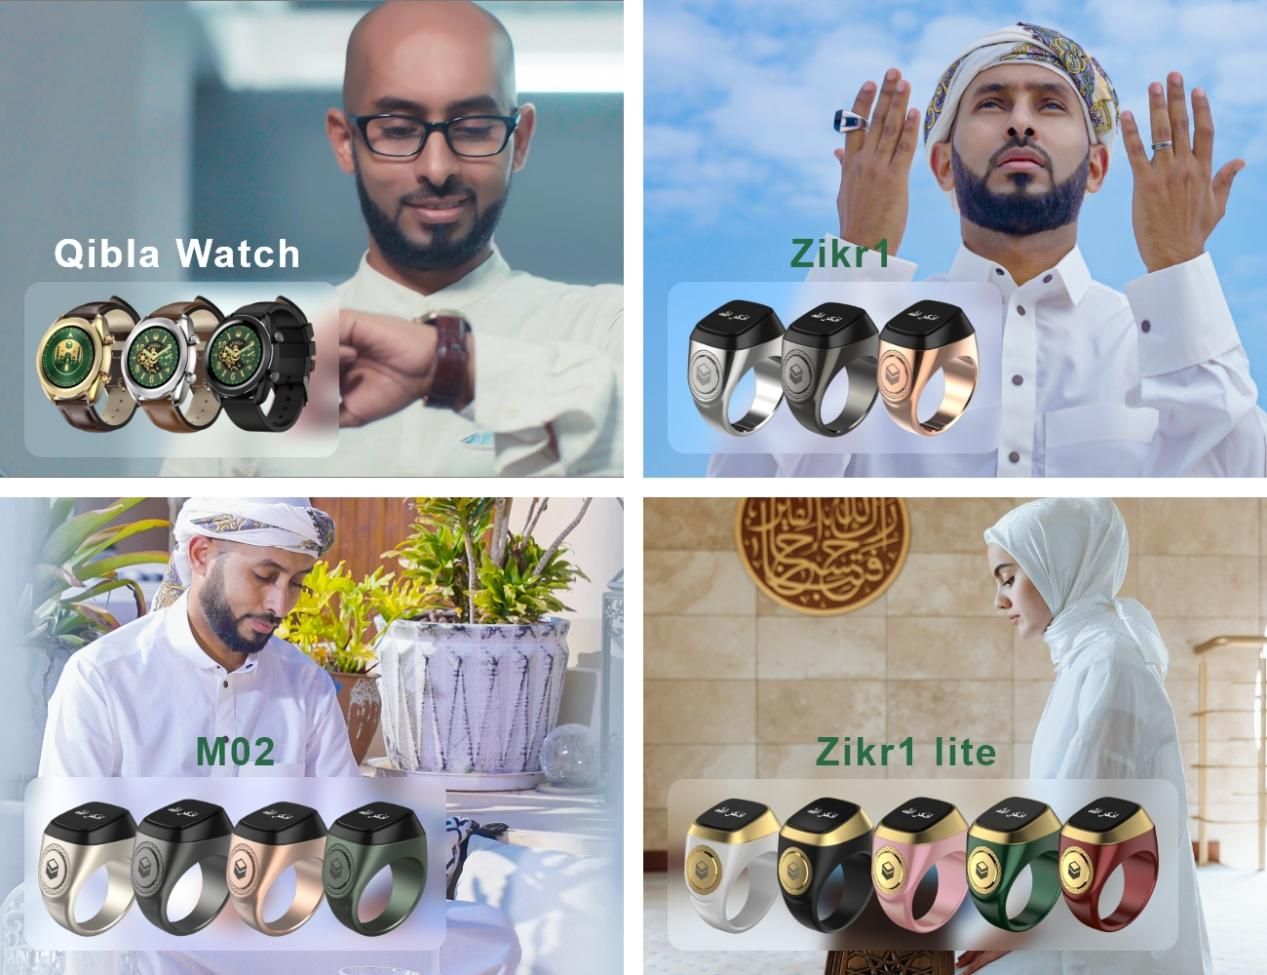 iQIBLA's Zikr Ring was launched for six months and became a hit